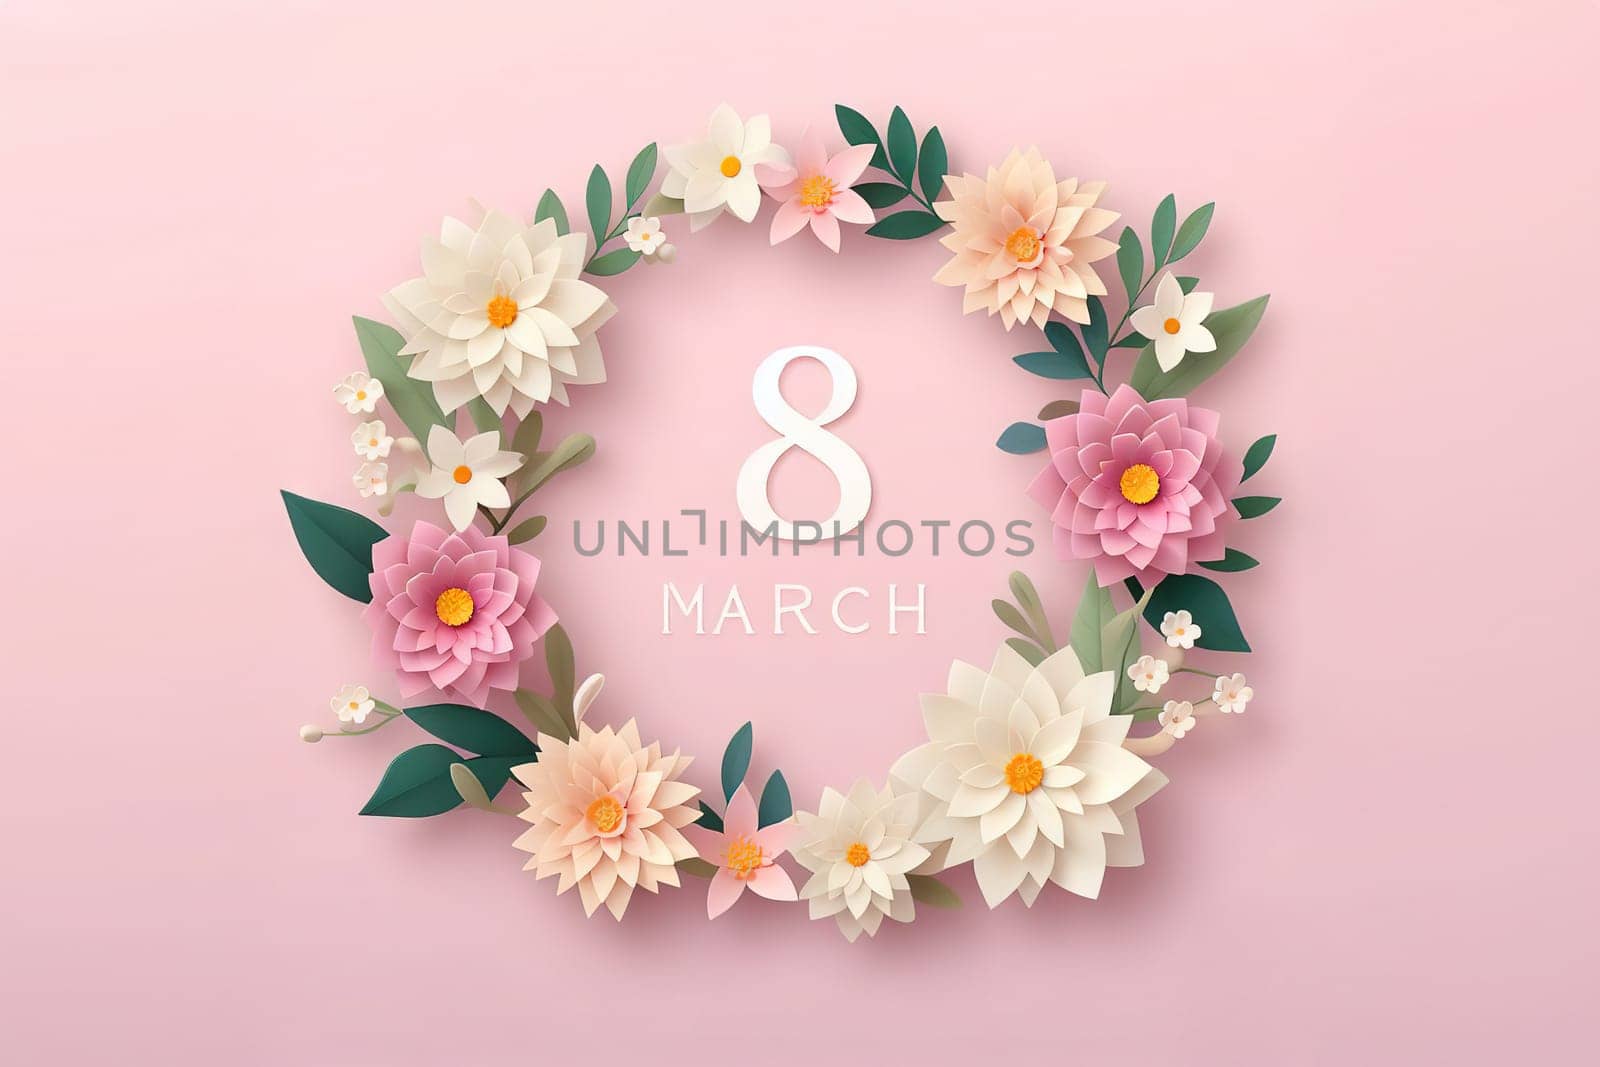 8 march women's day Poster or banner with flower on pink background. Promotion and shopping template for Love and women's day concept